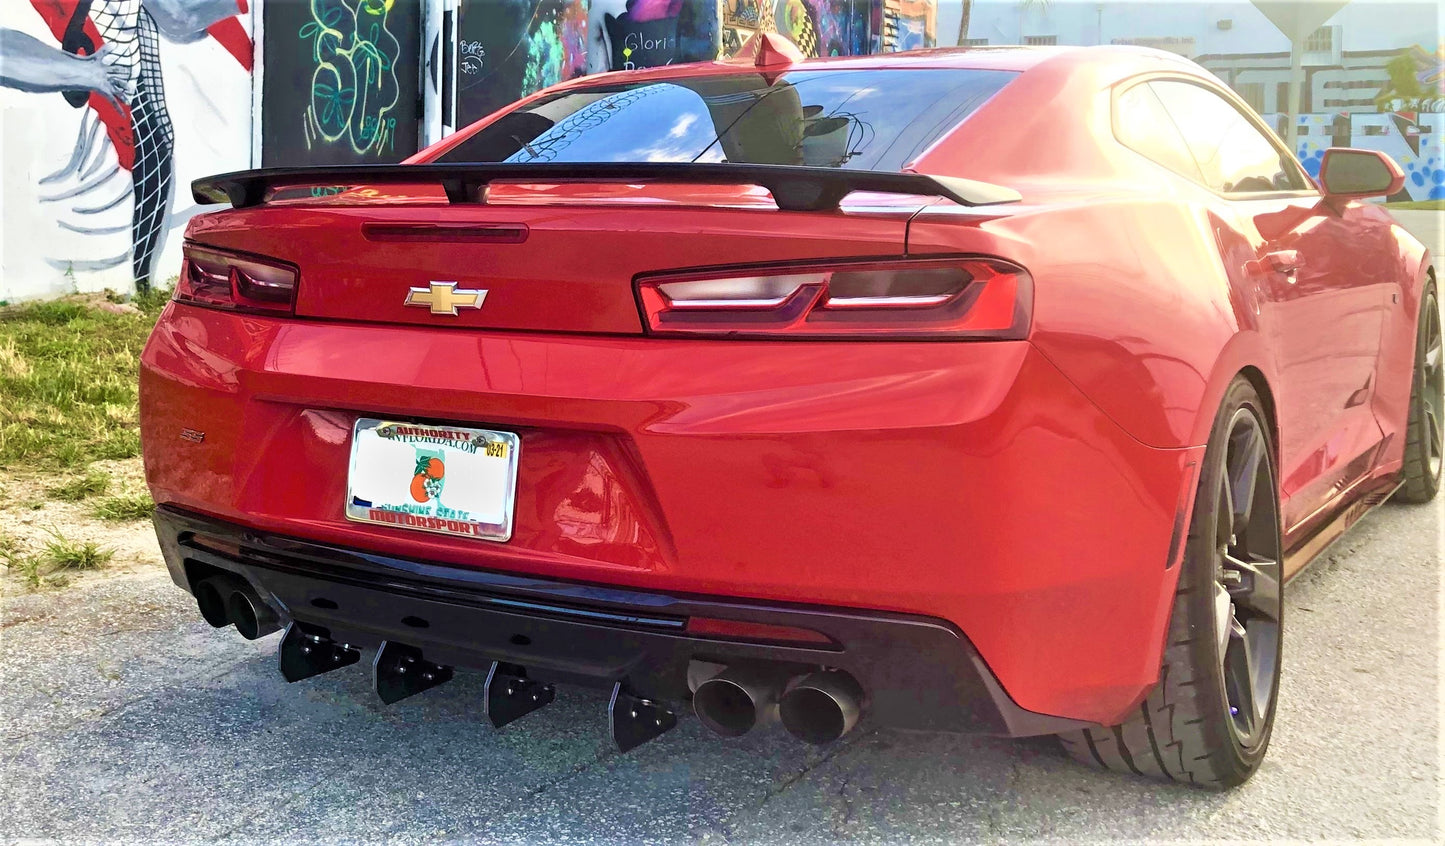 Authority Motorsport Rear Diffuser Kit V4 Compatible with Chevy Camaro SS ZL1 2016 2017 2018